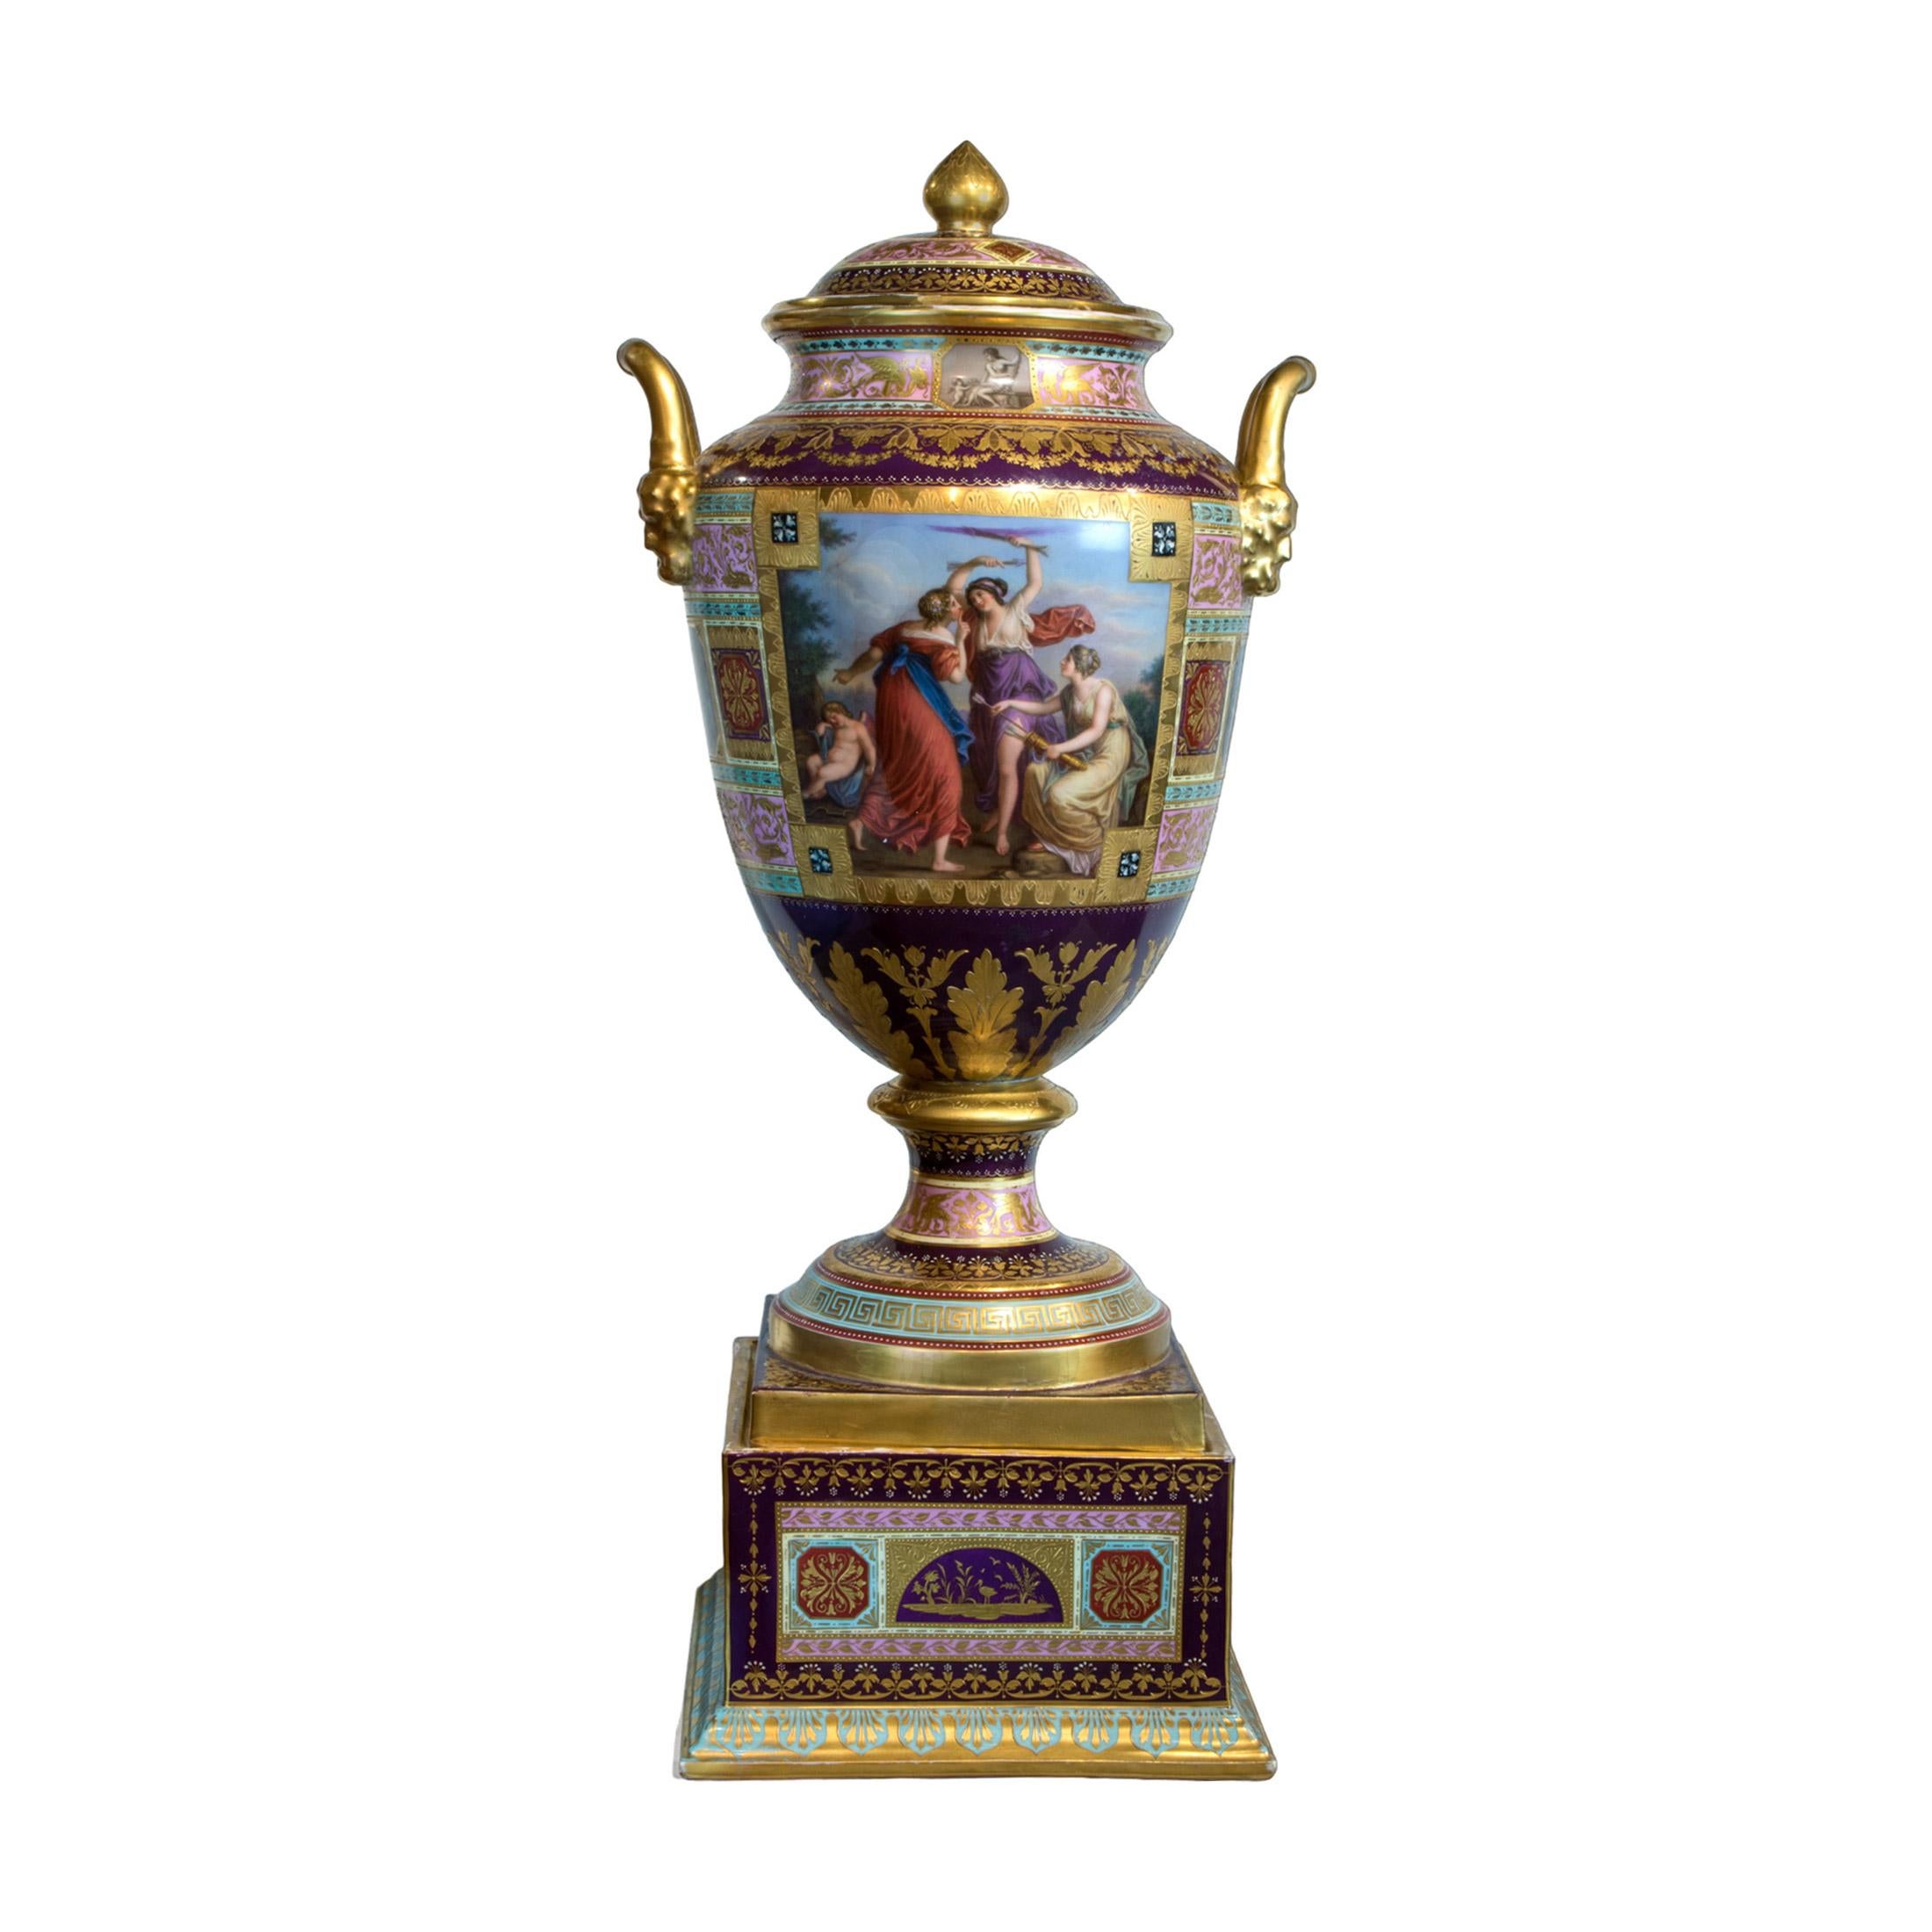  An exquisite pair of highly decorated Royal Vienna Gilt Porcelain covered vases. Scenes of neoclassical beauties on all four sides with large paintings on the front and back, and smaller scenes below each handle. The porcelain glazes are